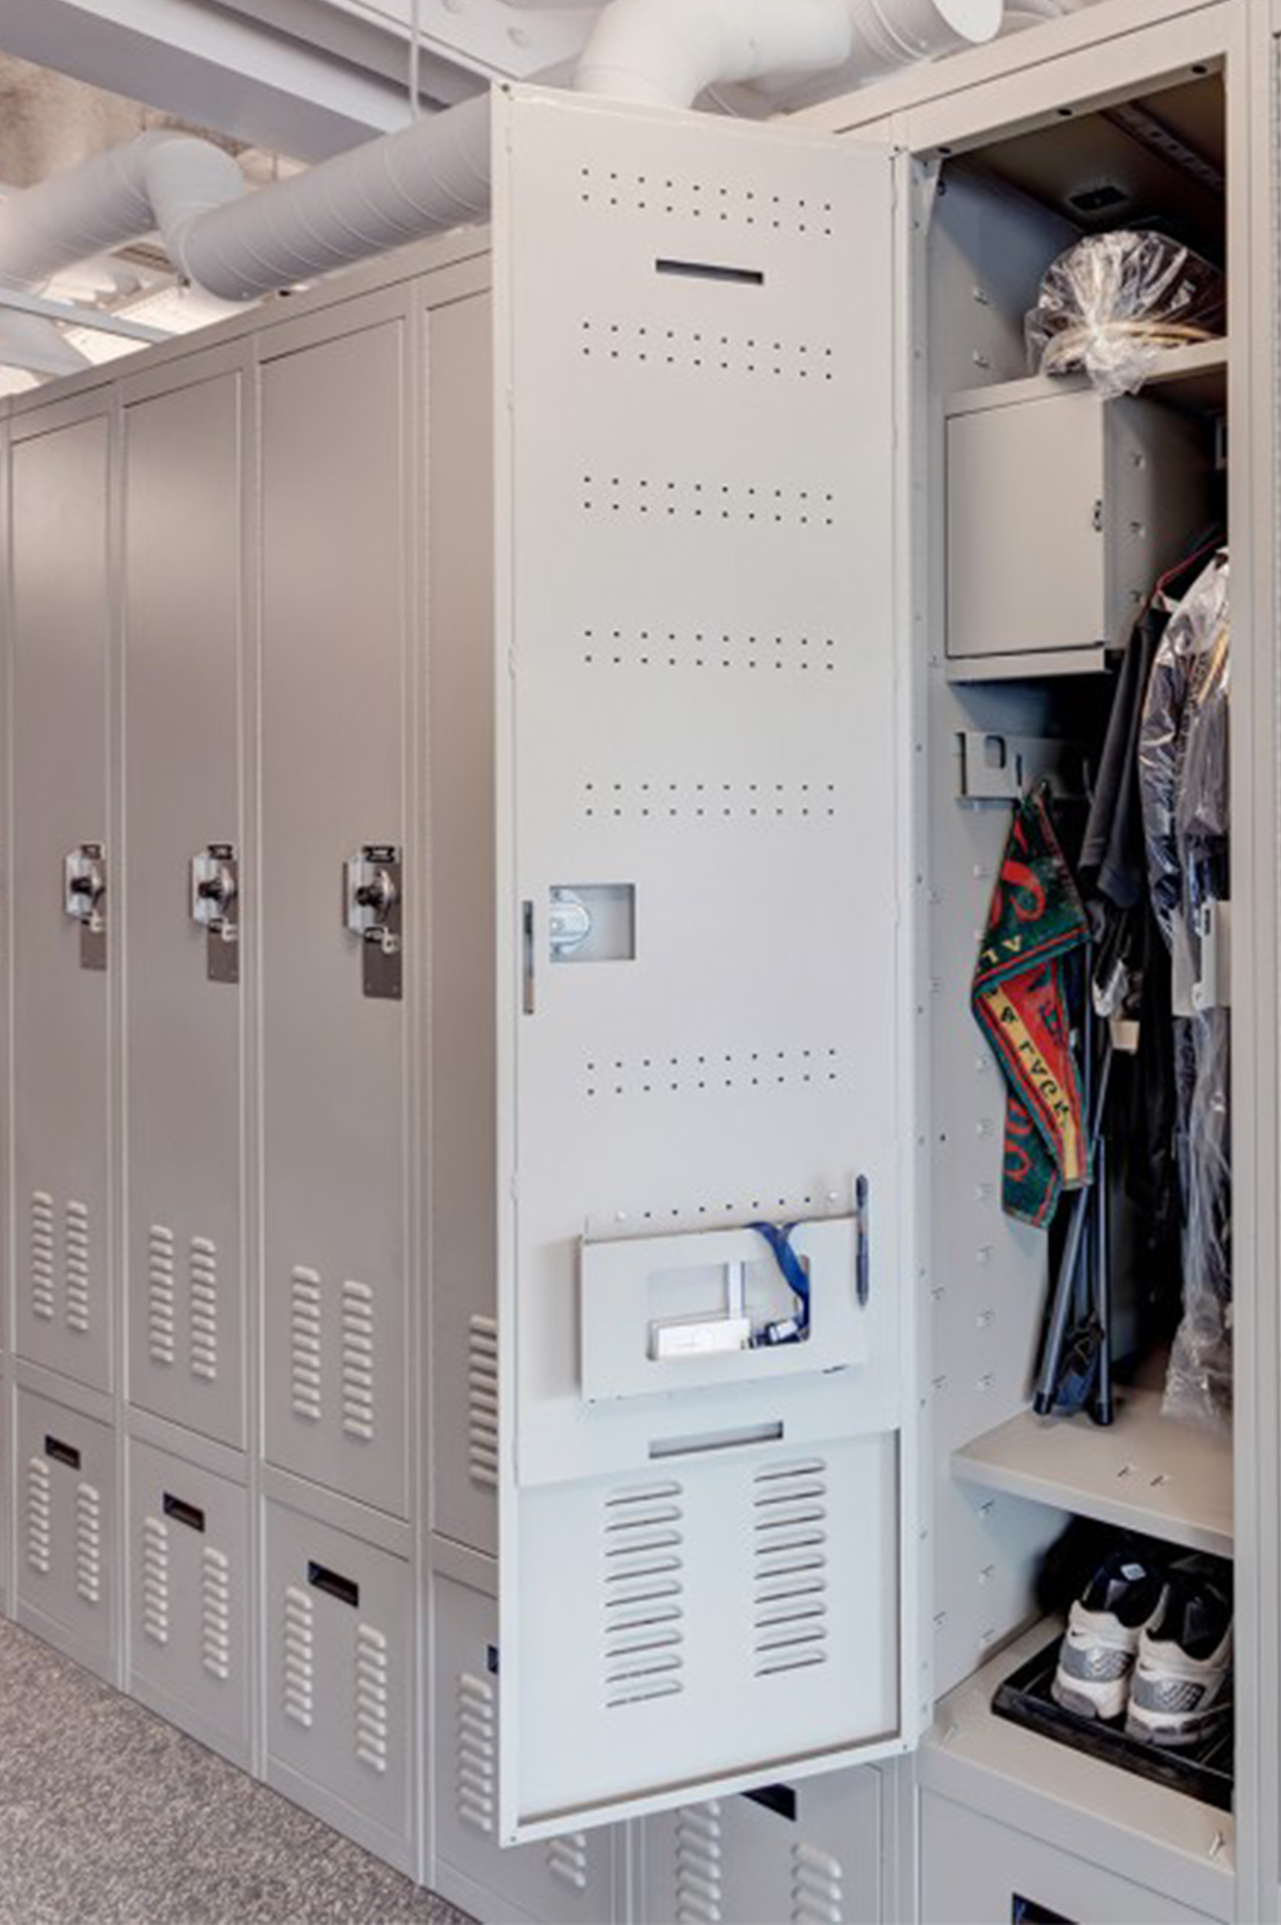 Flexible placement for all components, shelves, inside lockable box, drawers, document holder, hooks, garment hangers in personal storage locker